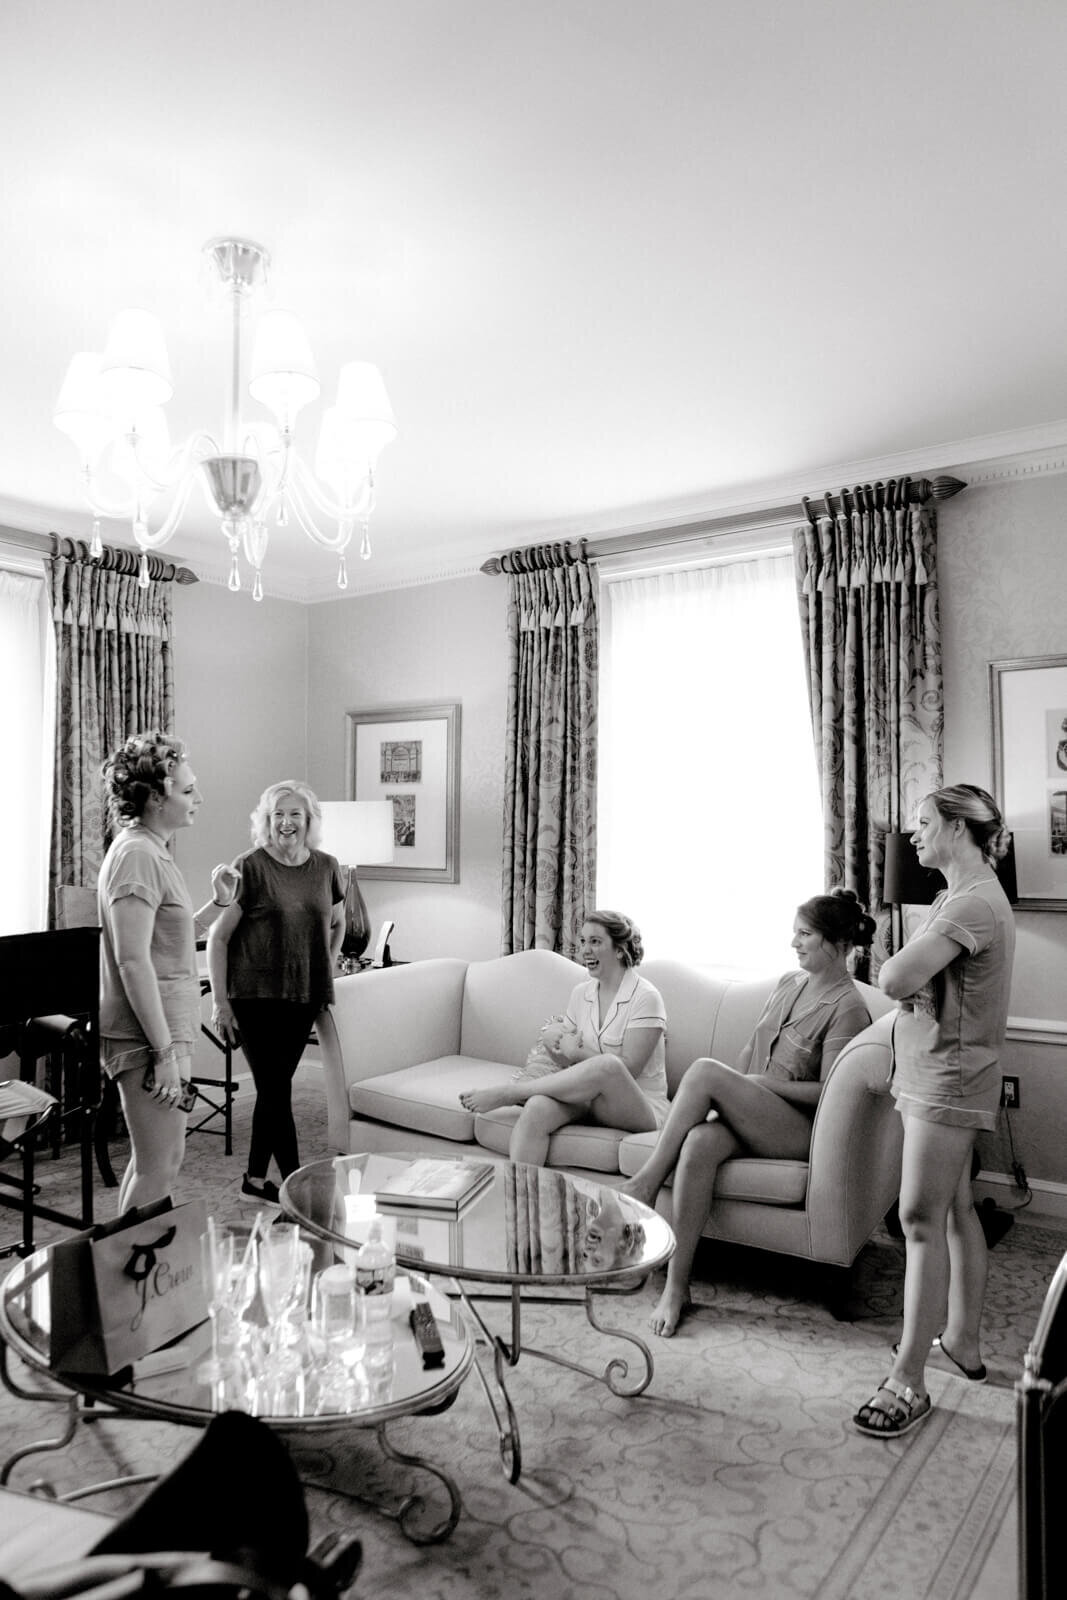 A group of five ladies inside a room, chatting happily